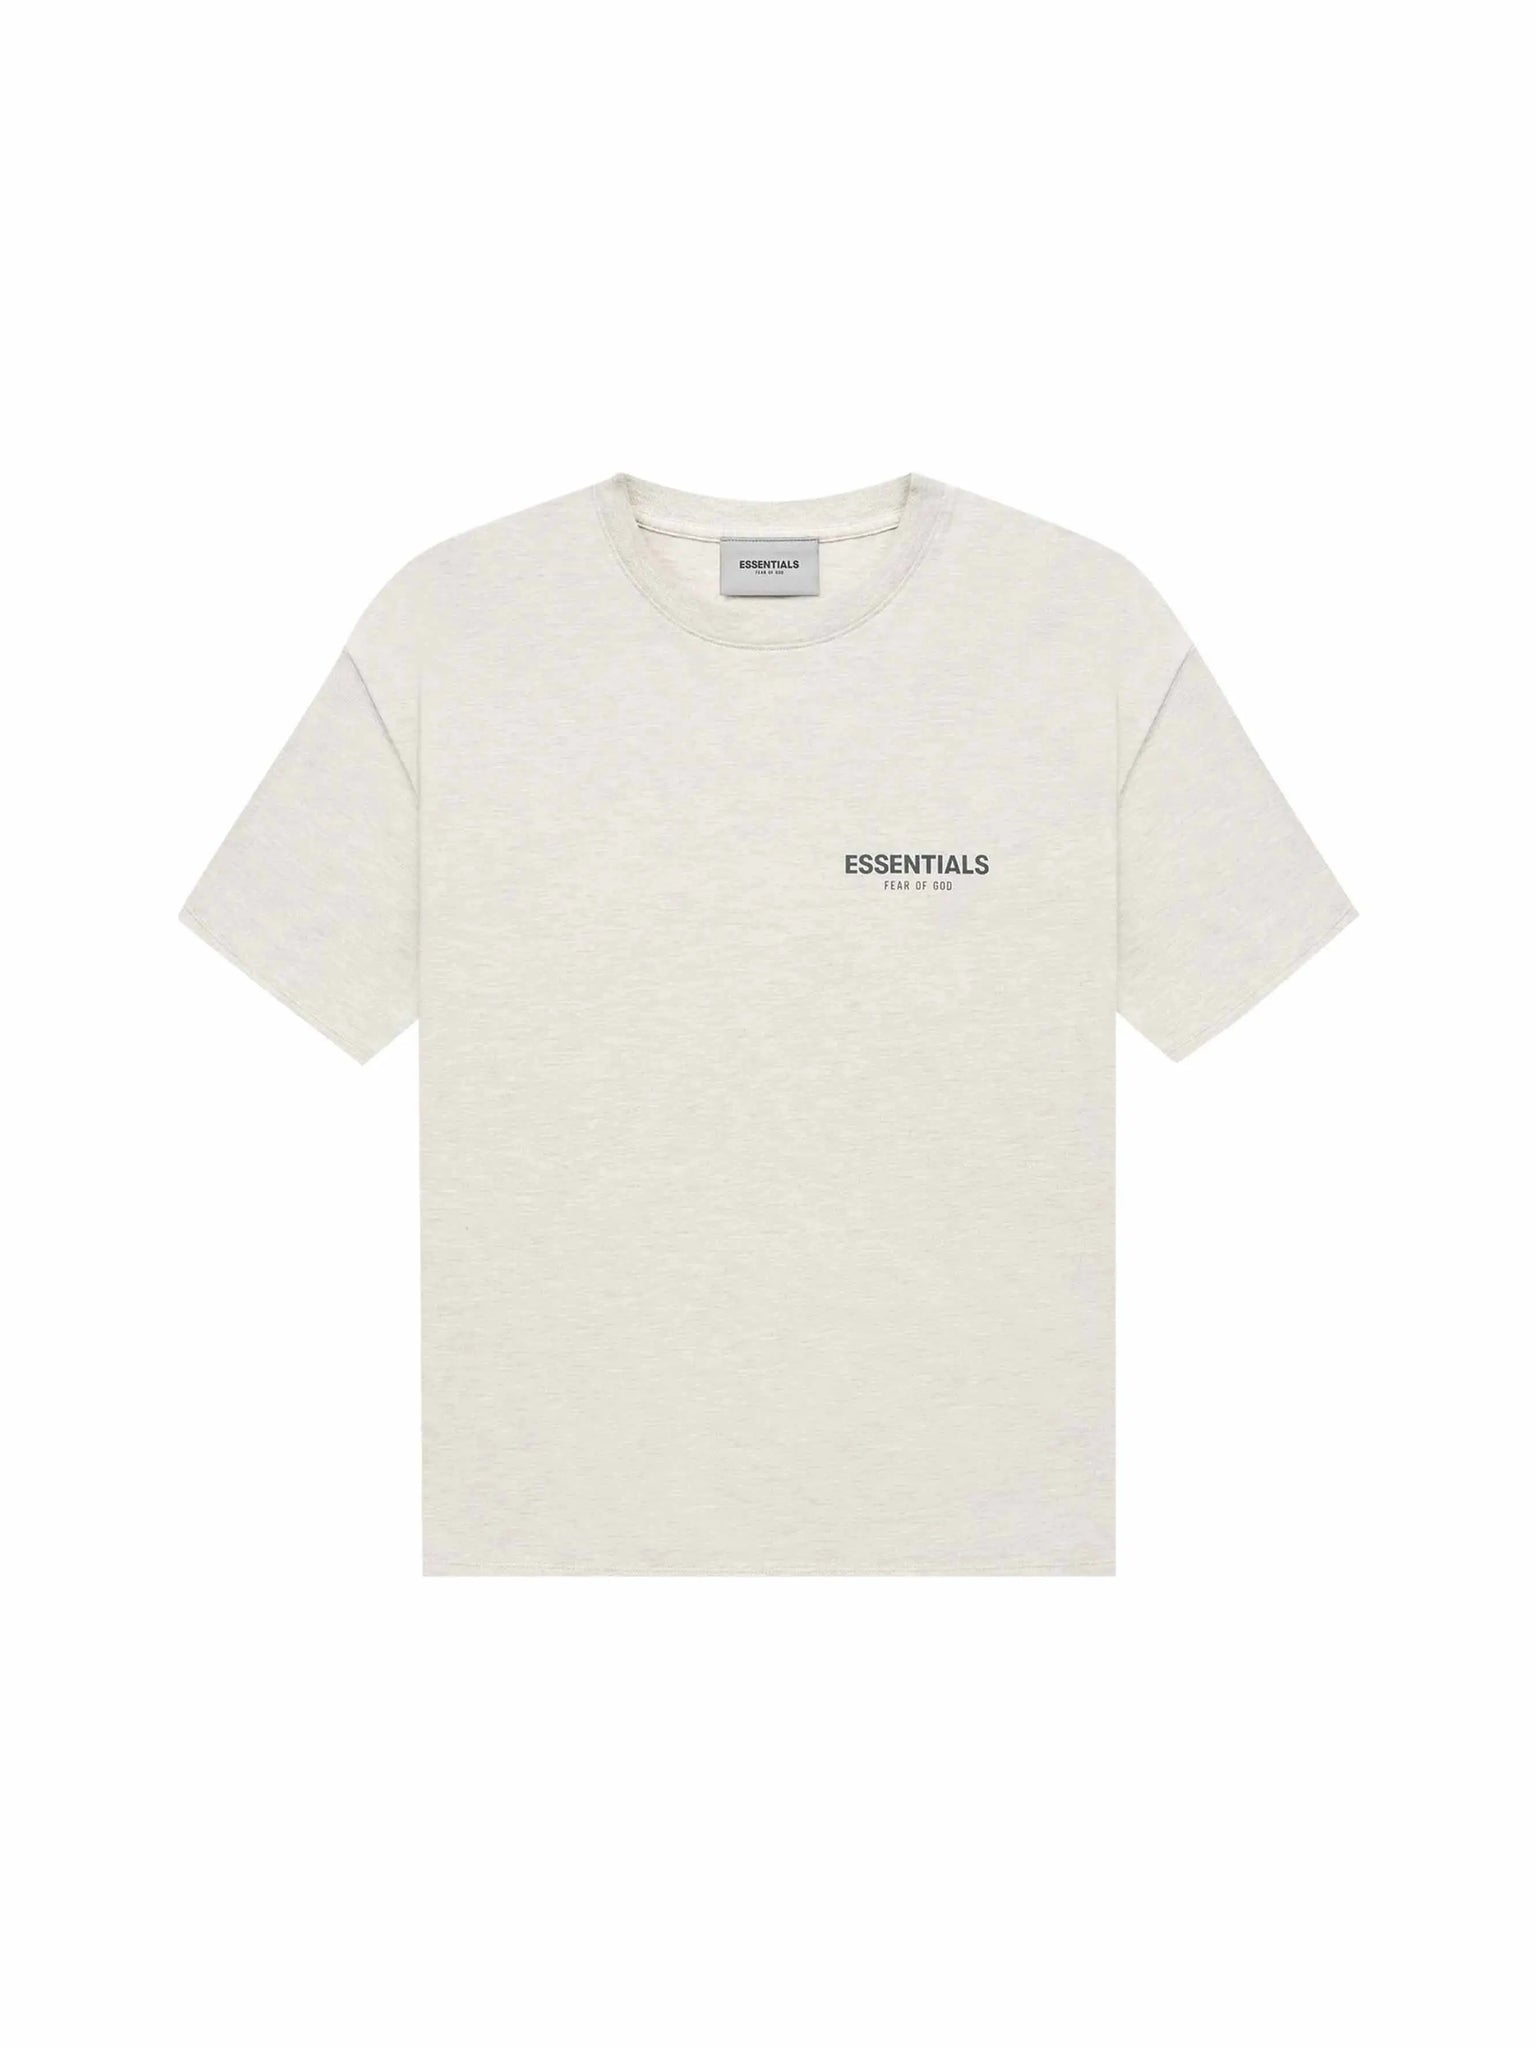 Fear of God Essentials Core Collection T-shirt Light Heather Oatmeal - Prior